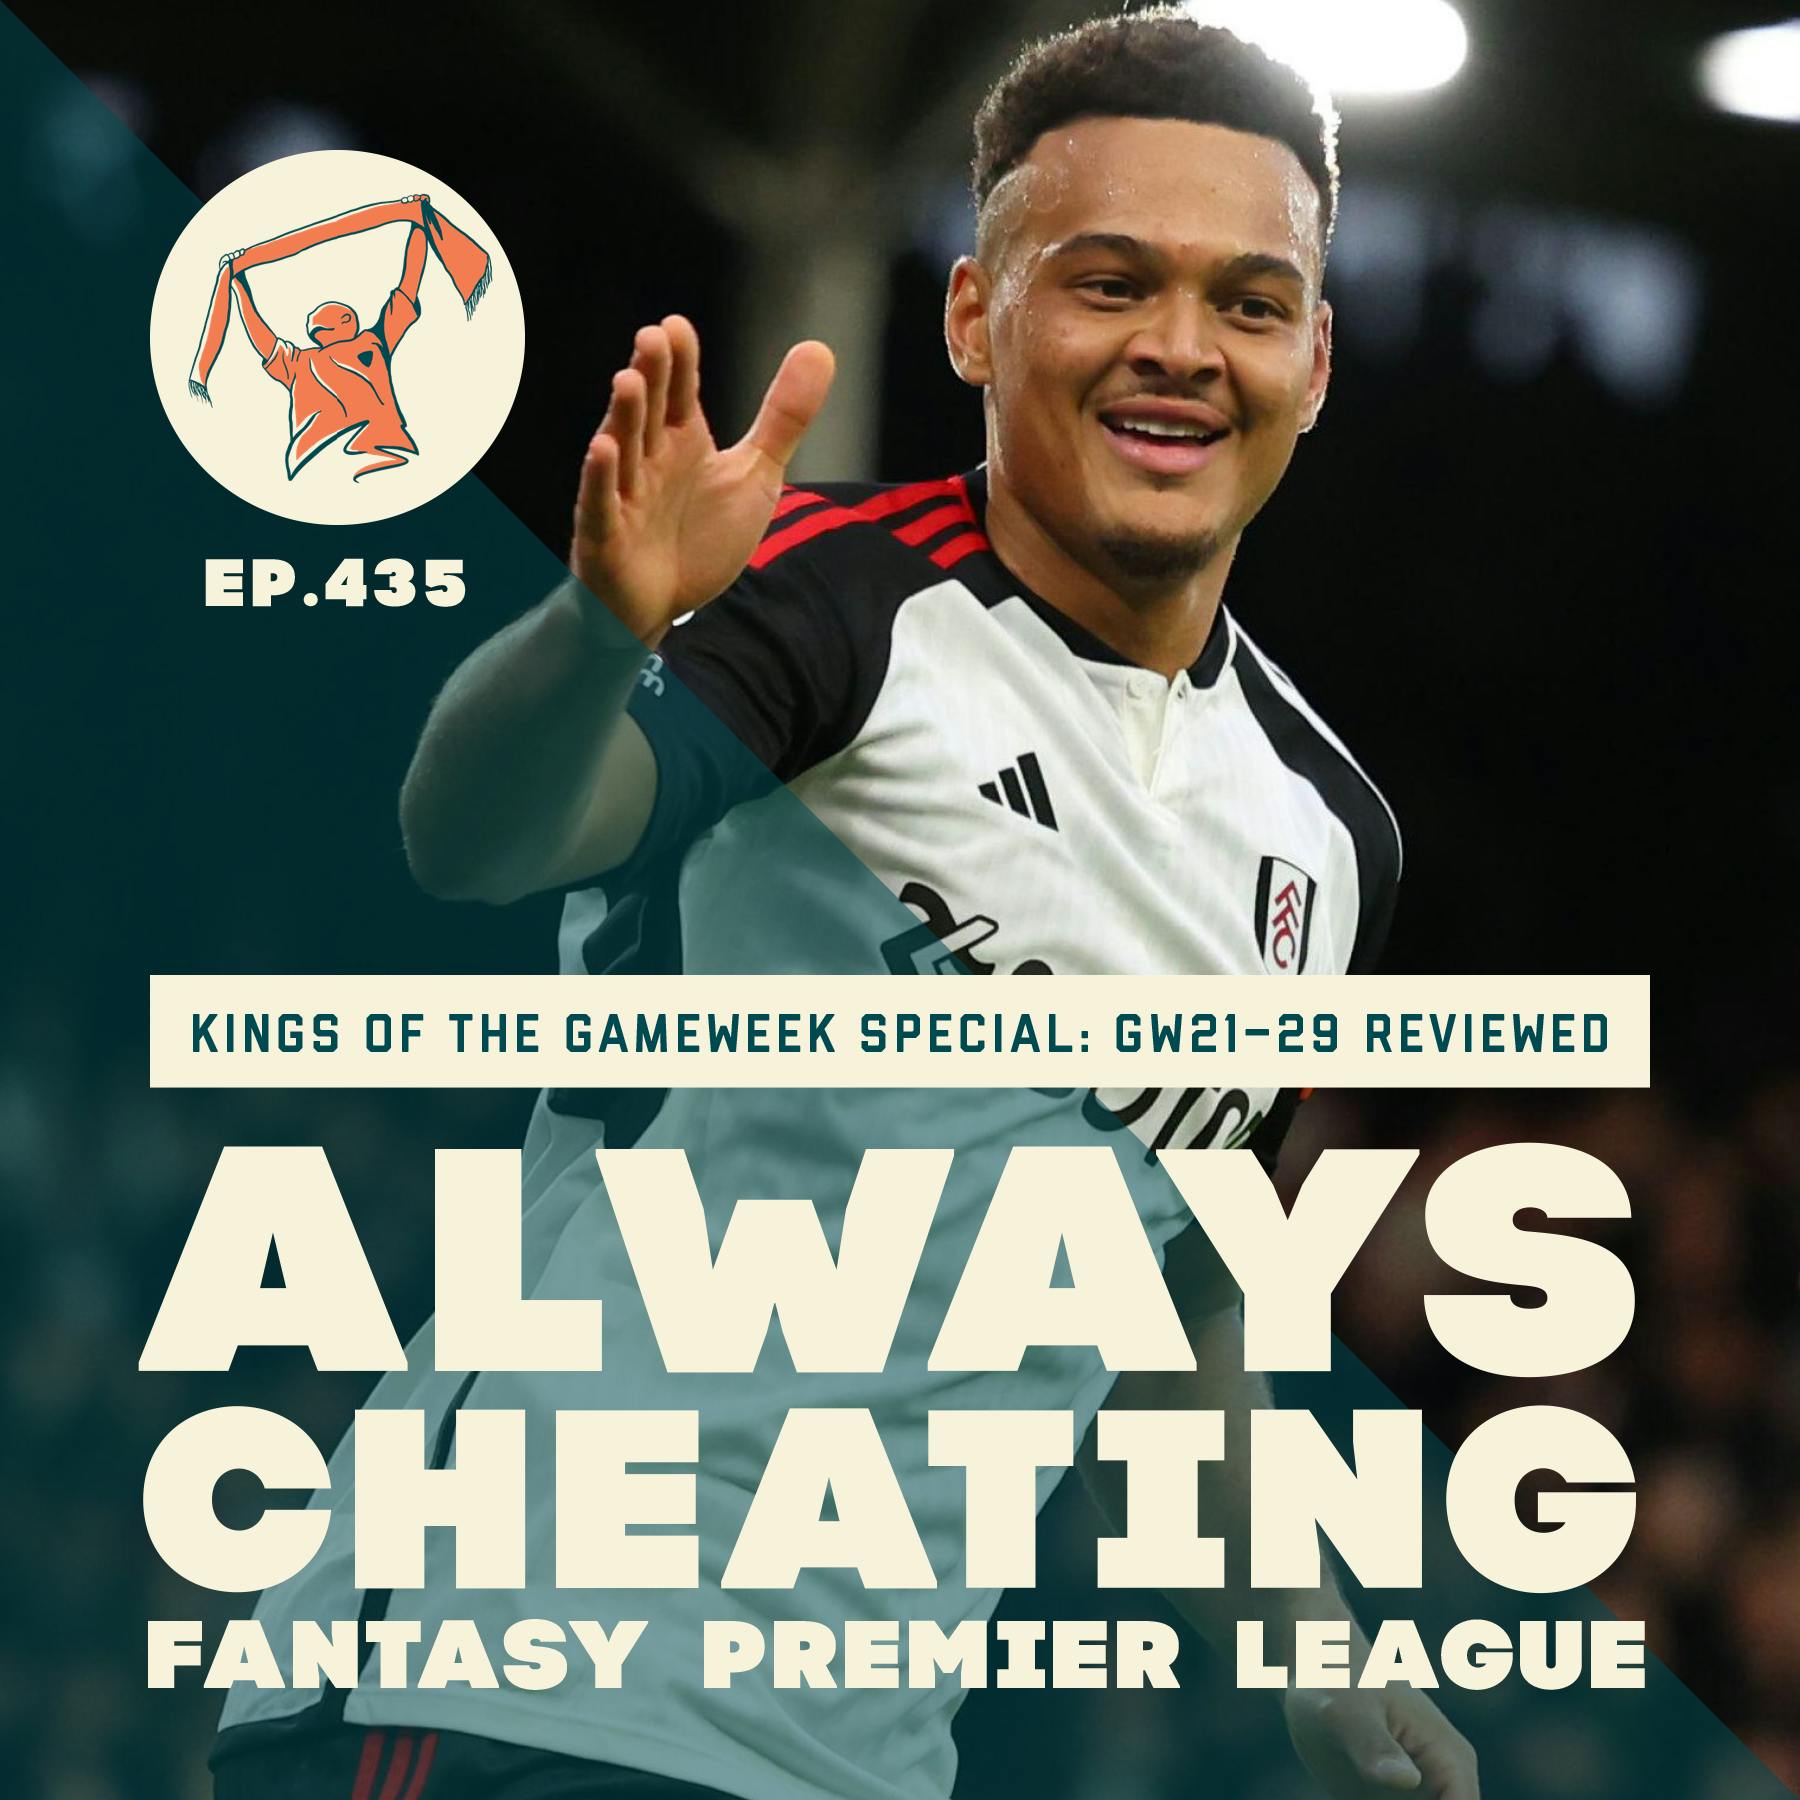 GW29 Recap (Yikes!), FPL Look-Ahead, and Kings of the Gameweek Special